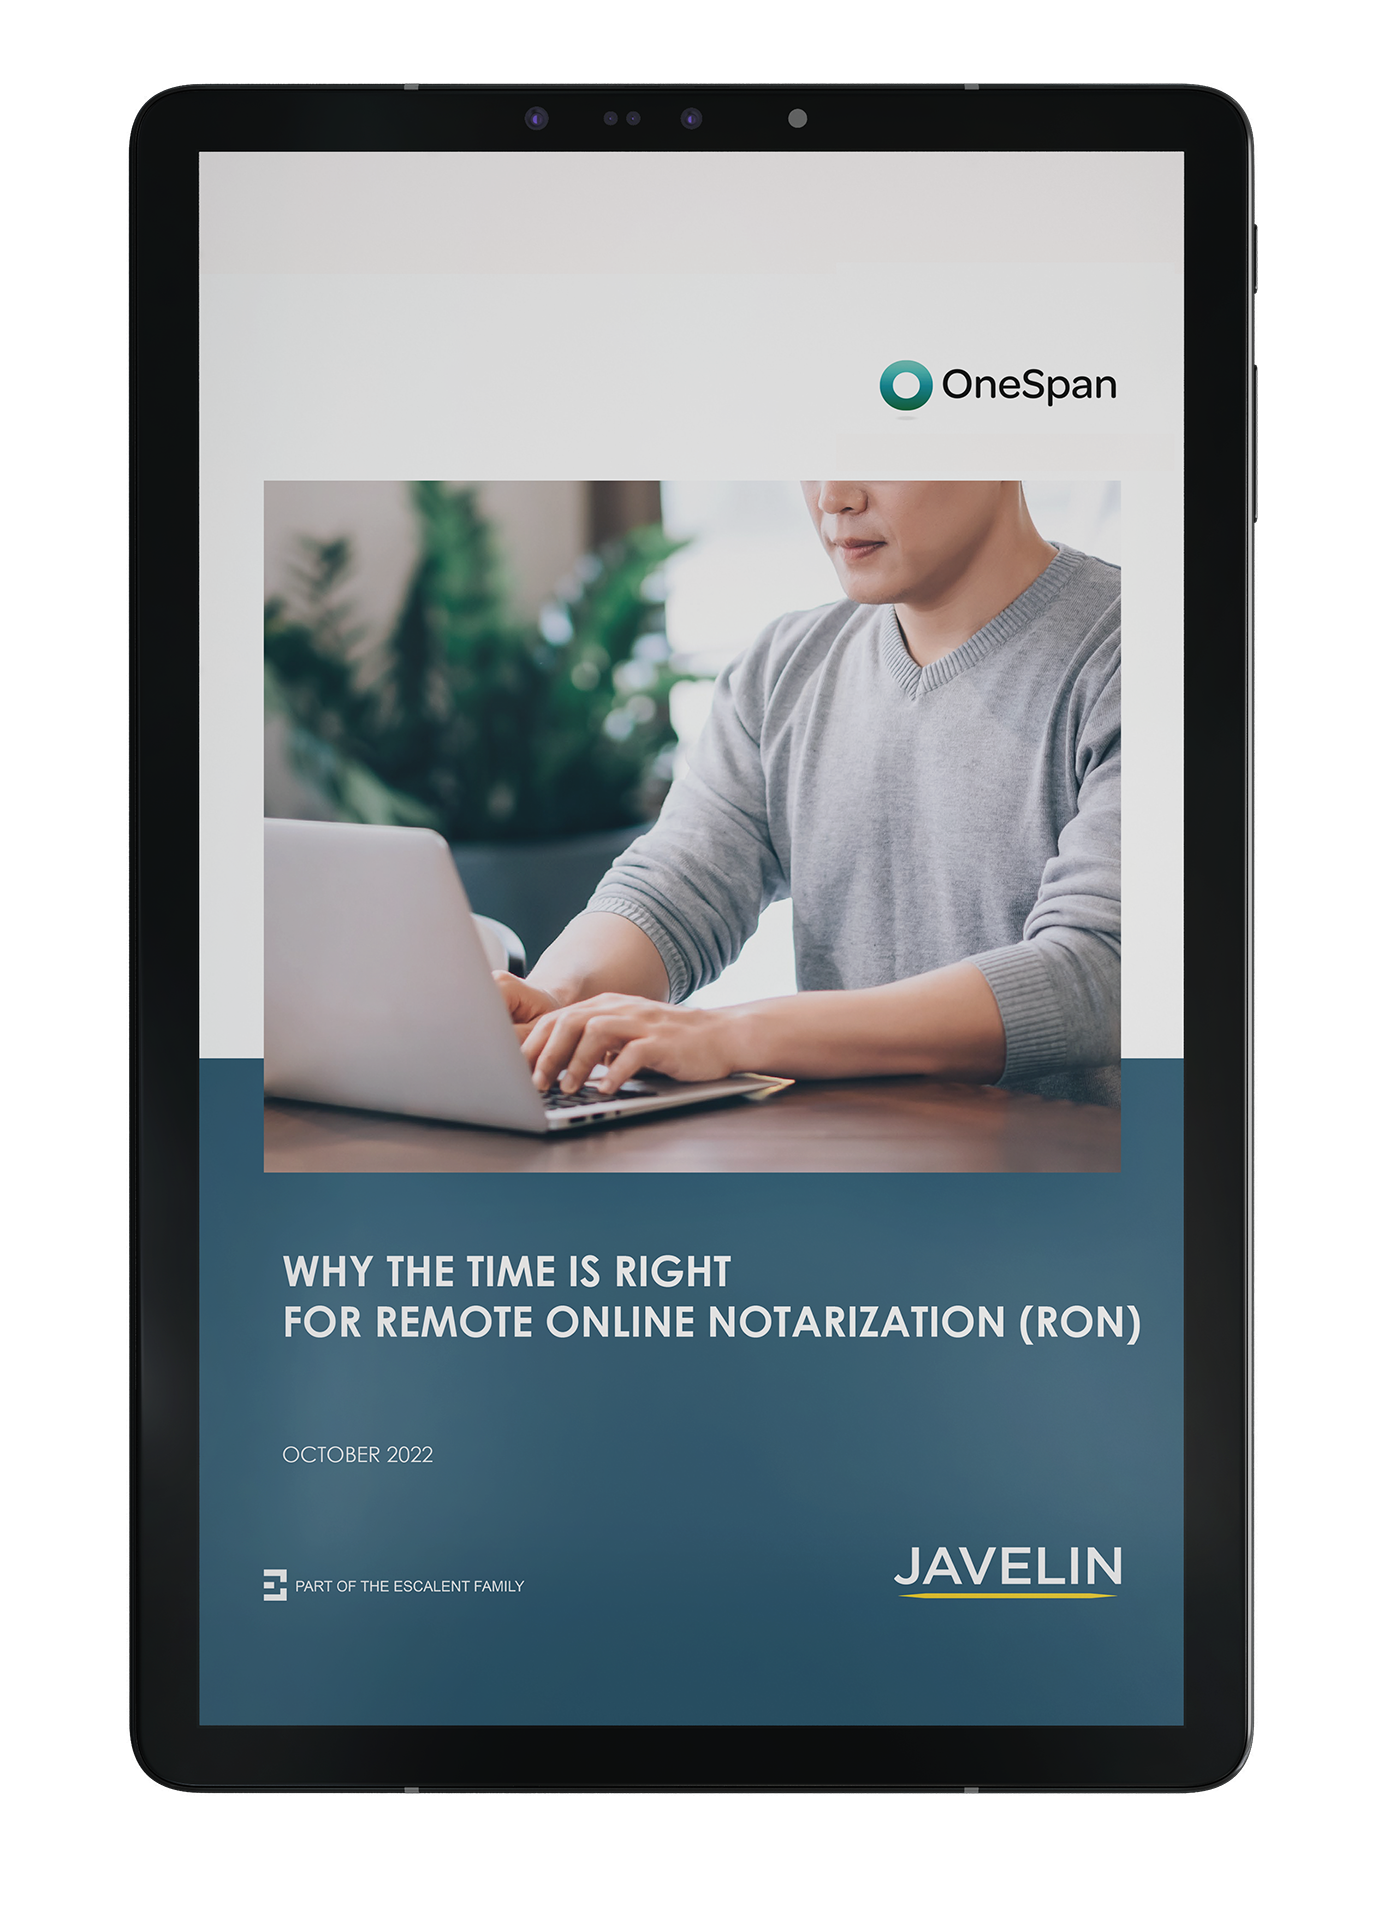 Javelin Strategy & Research - Why the time is right for remote online notarization